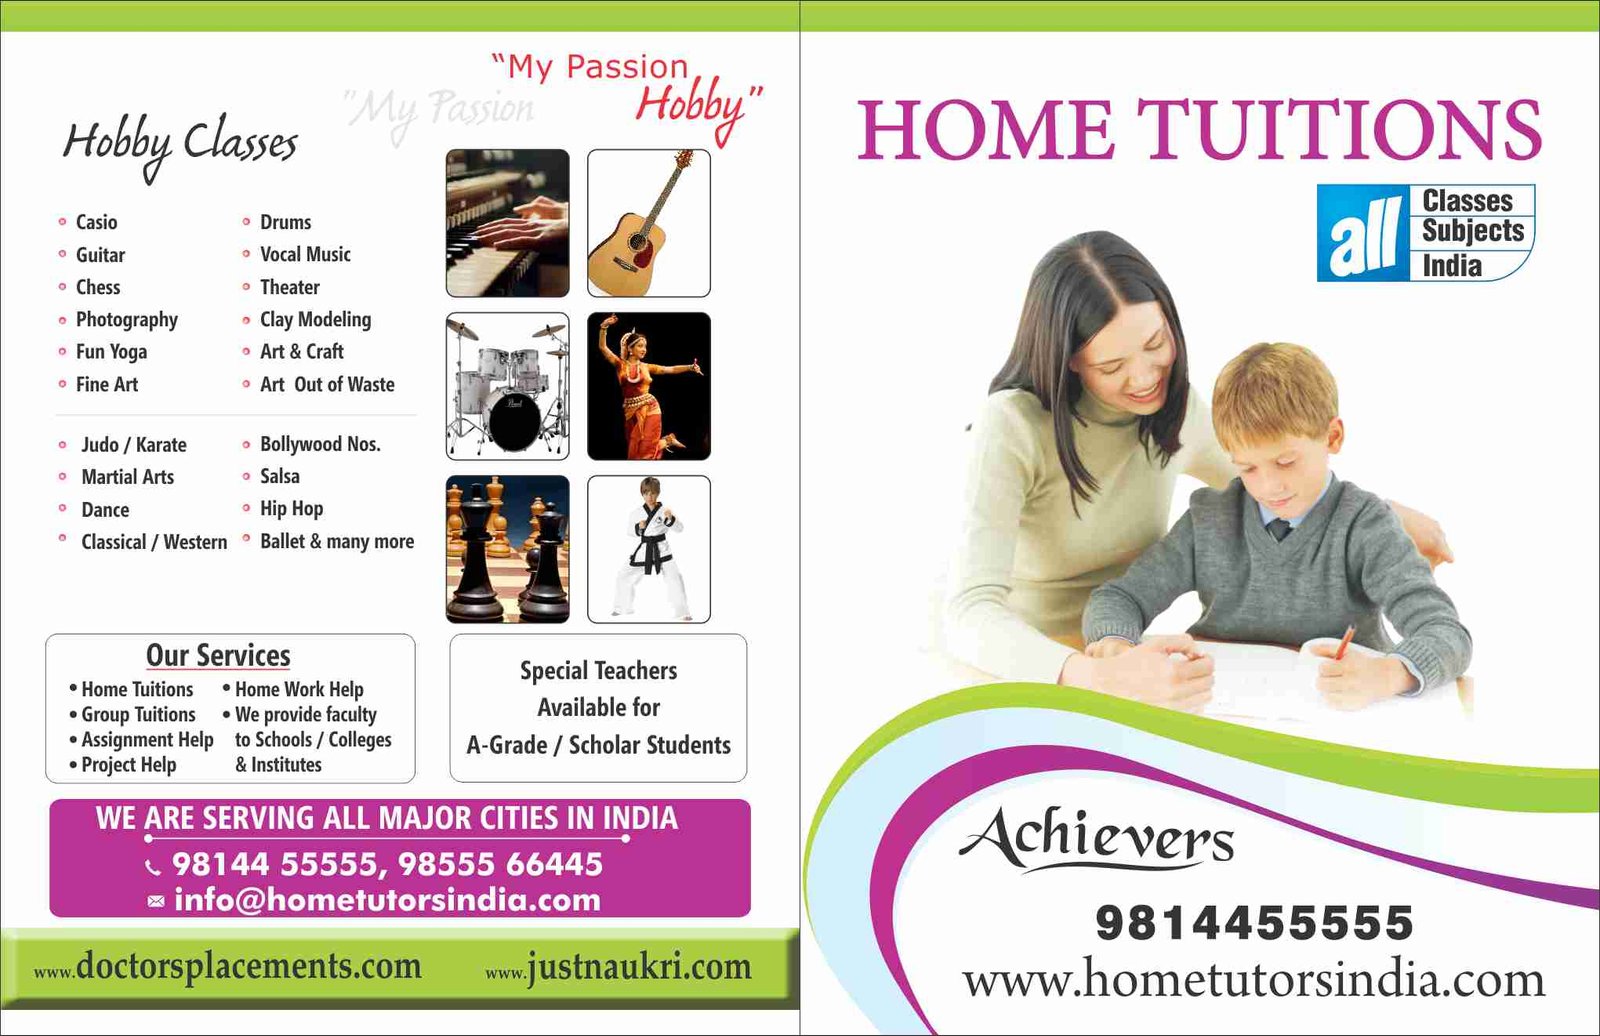 Home Tutors India - Brochure - Click to view enlarge